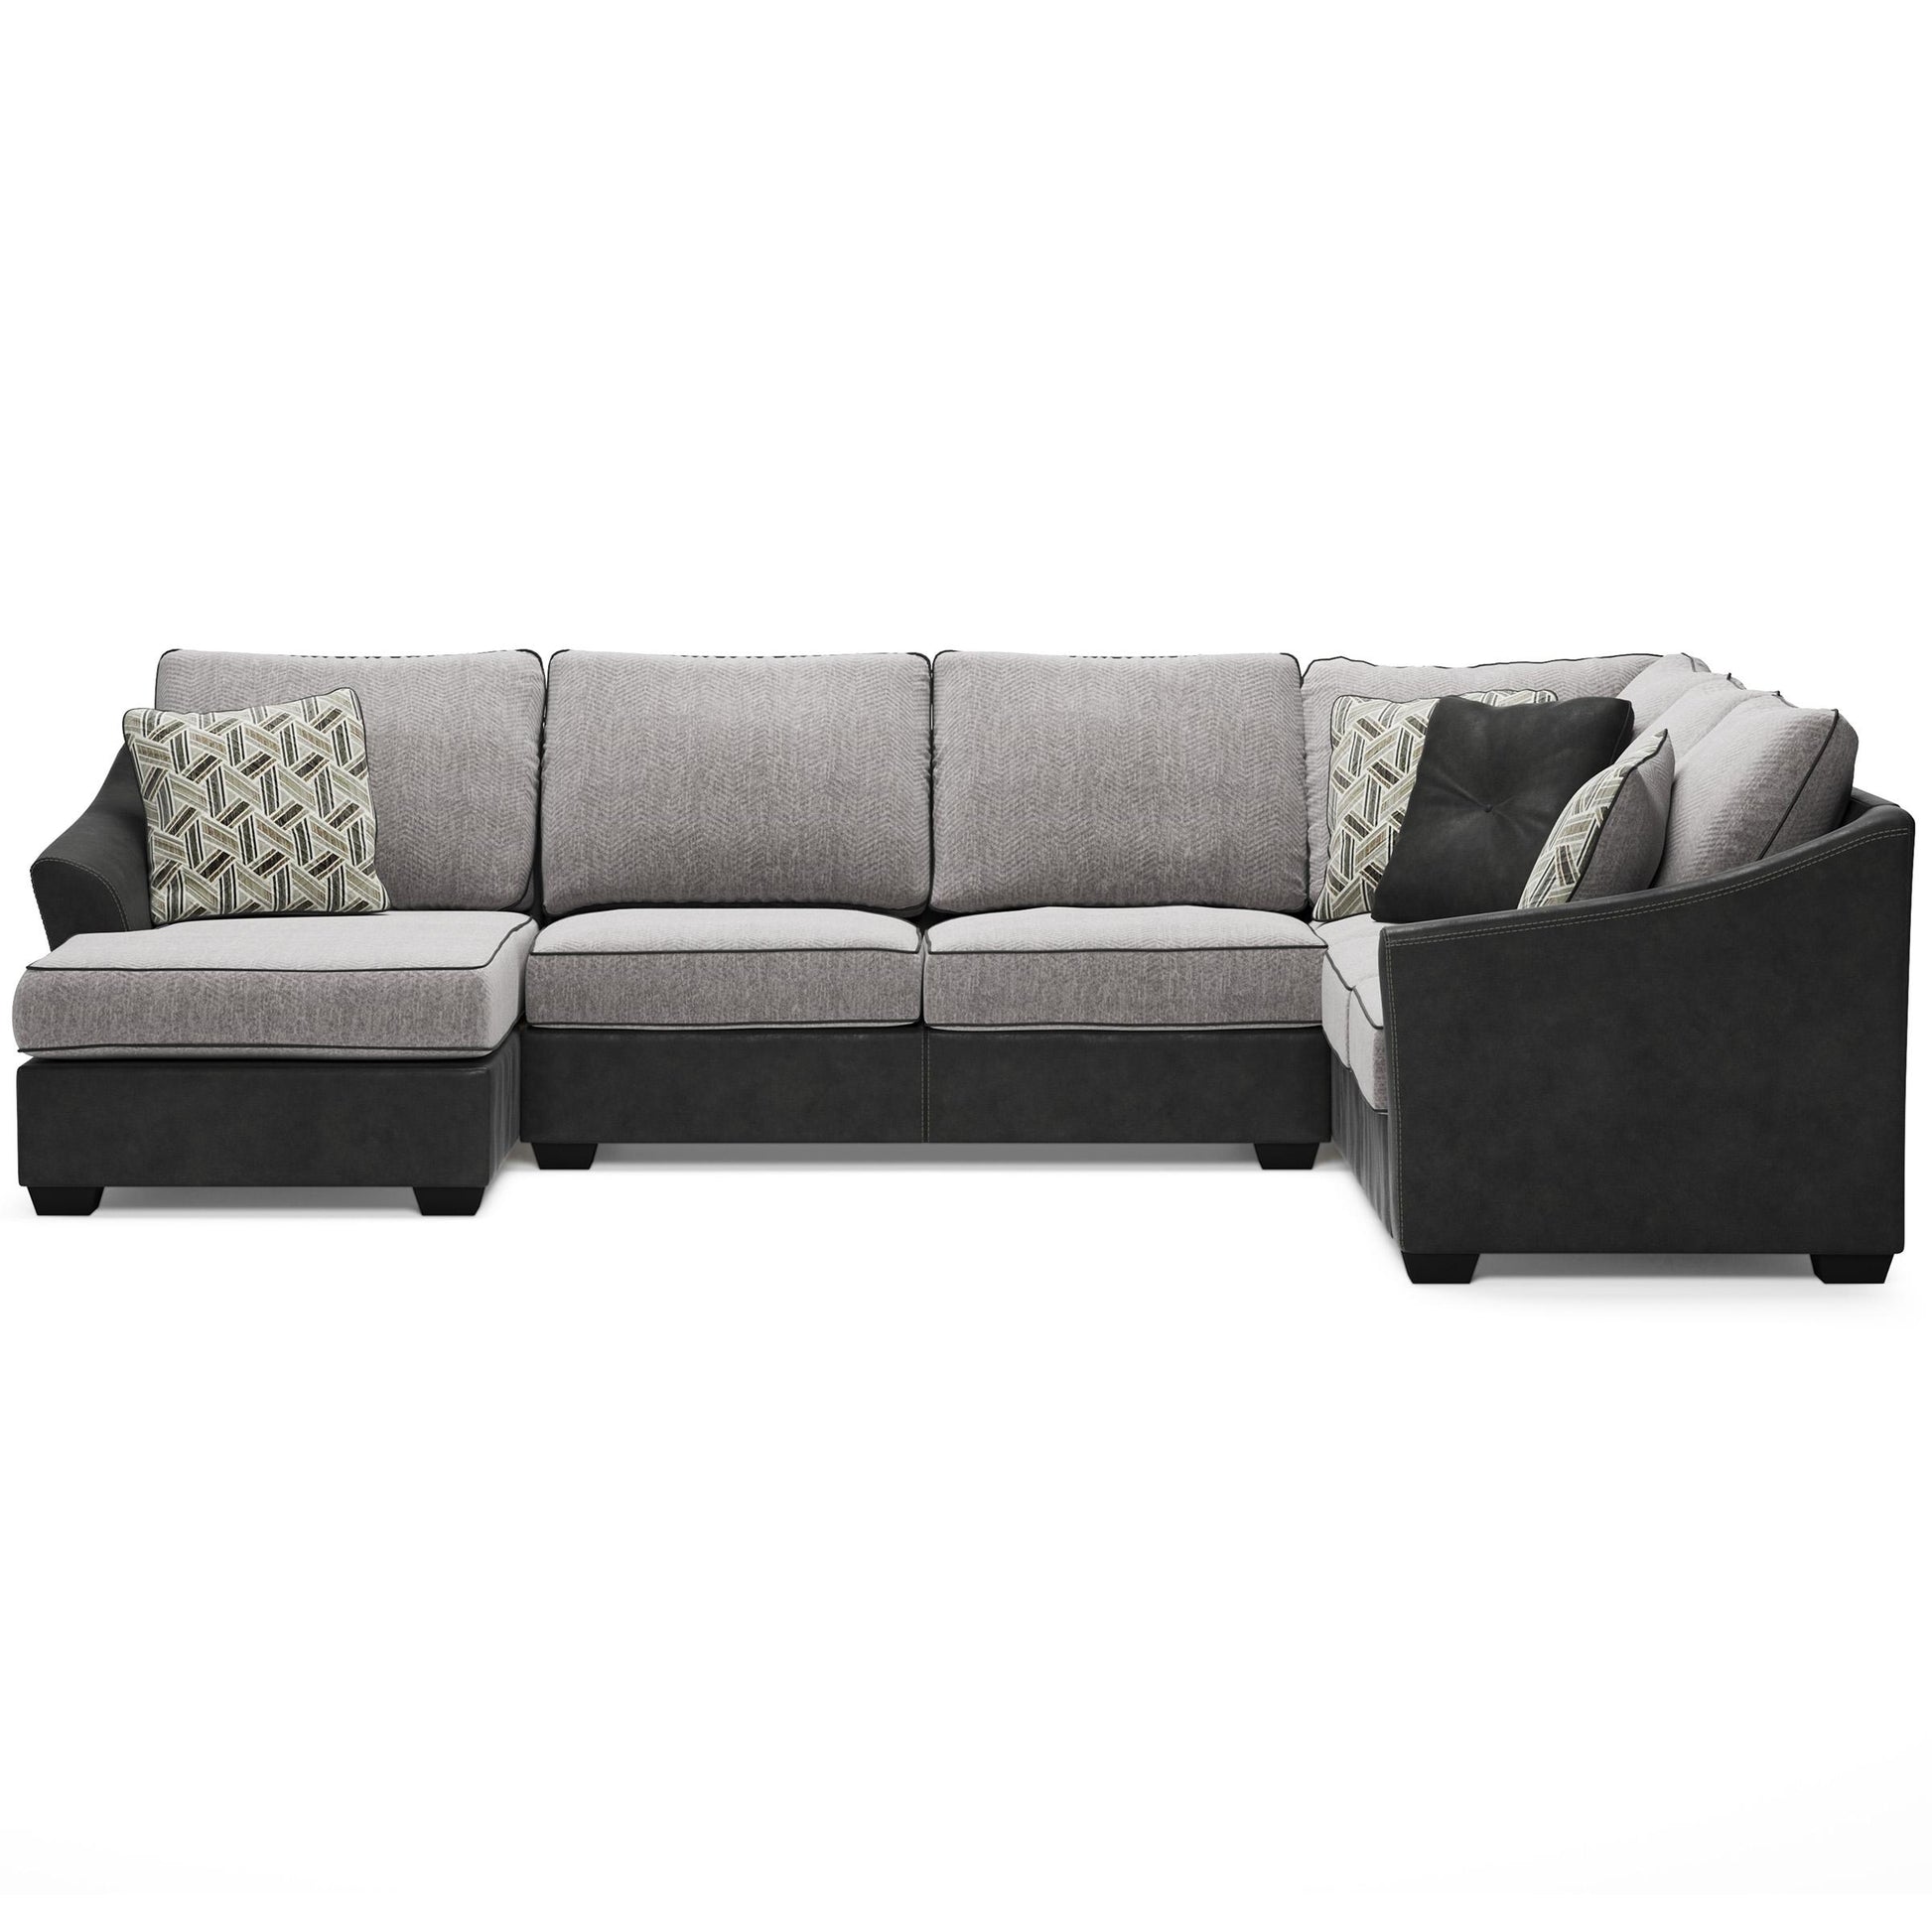 Signature Design by Ashley Bilgray Fabric and Leather Look 3 pc Sectional 5500316/5500334/5500349